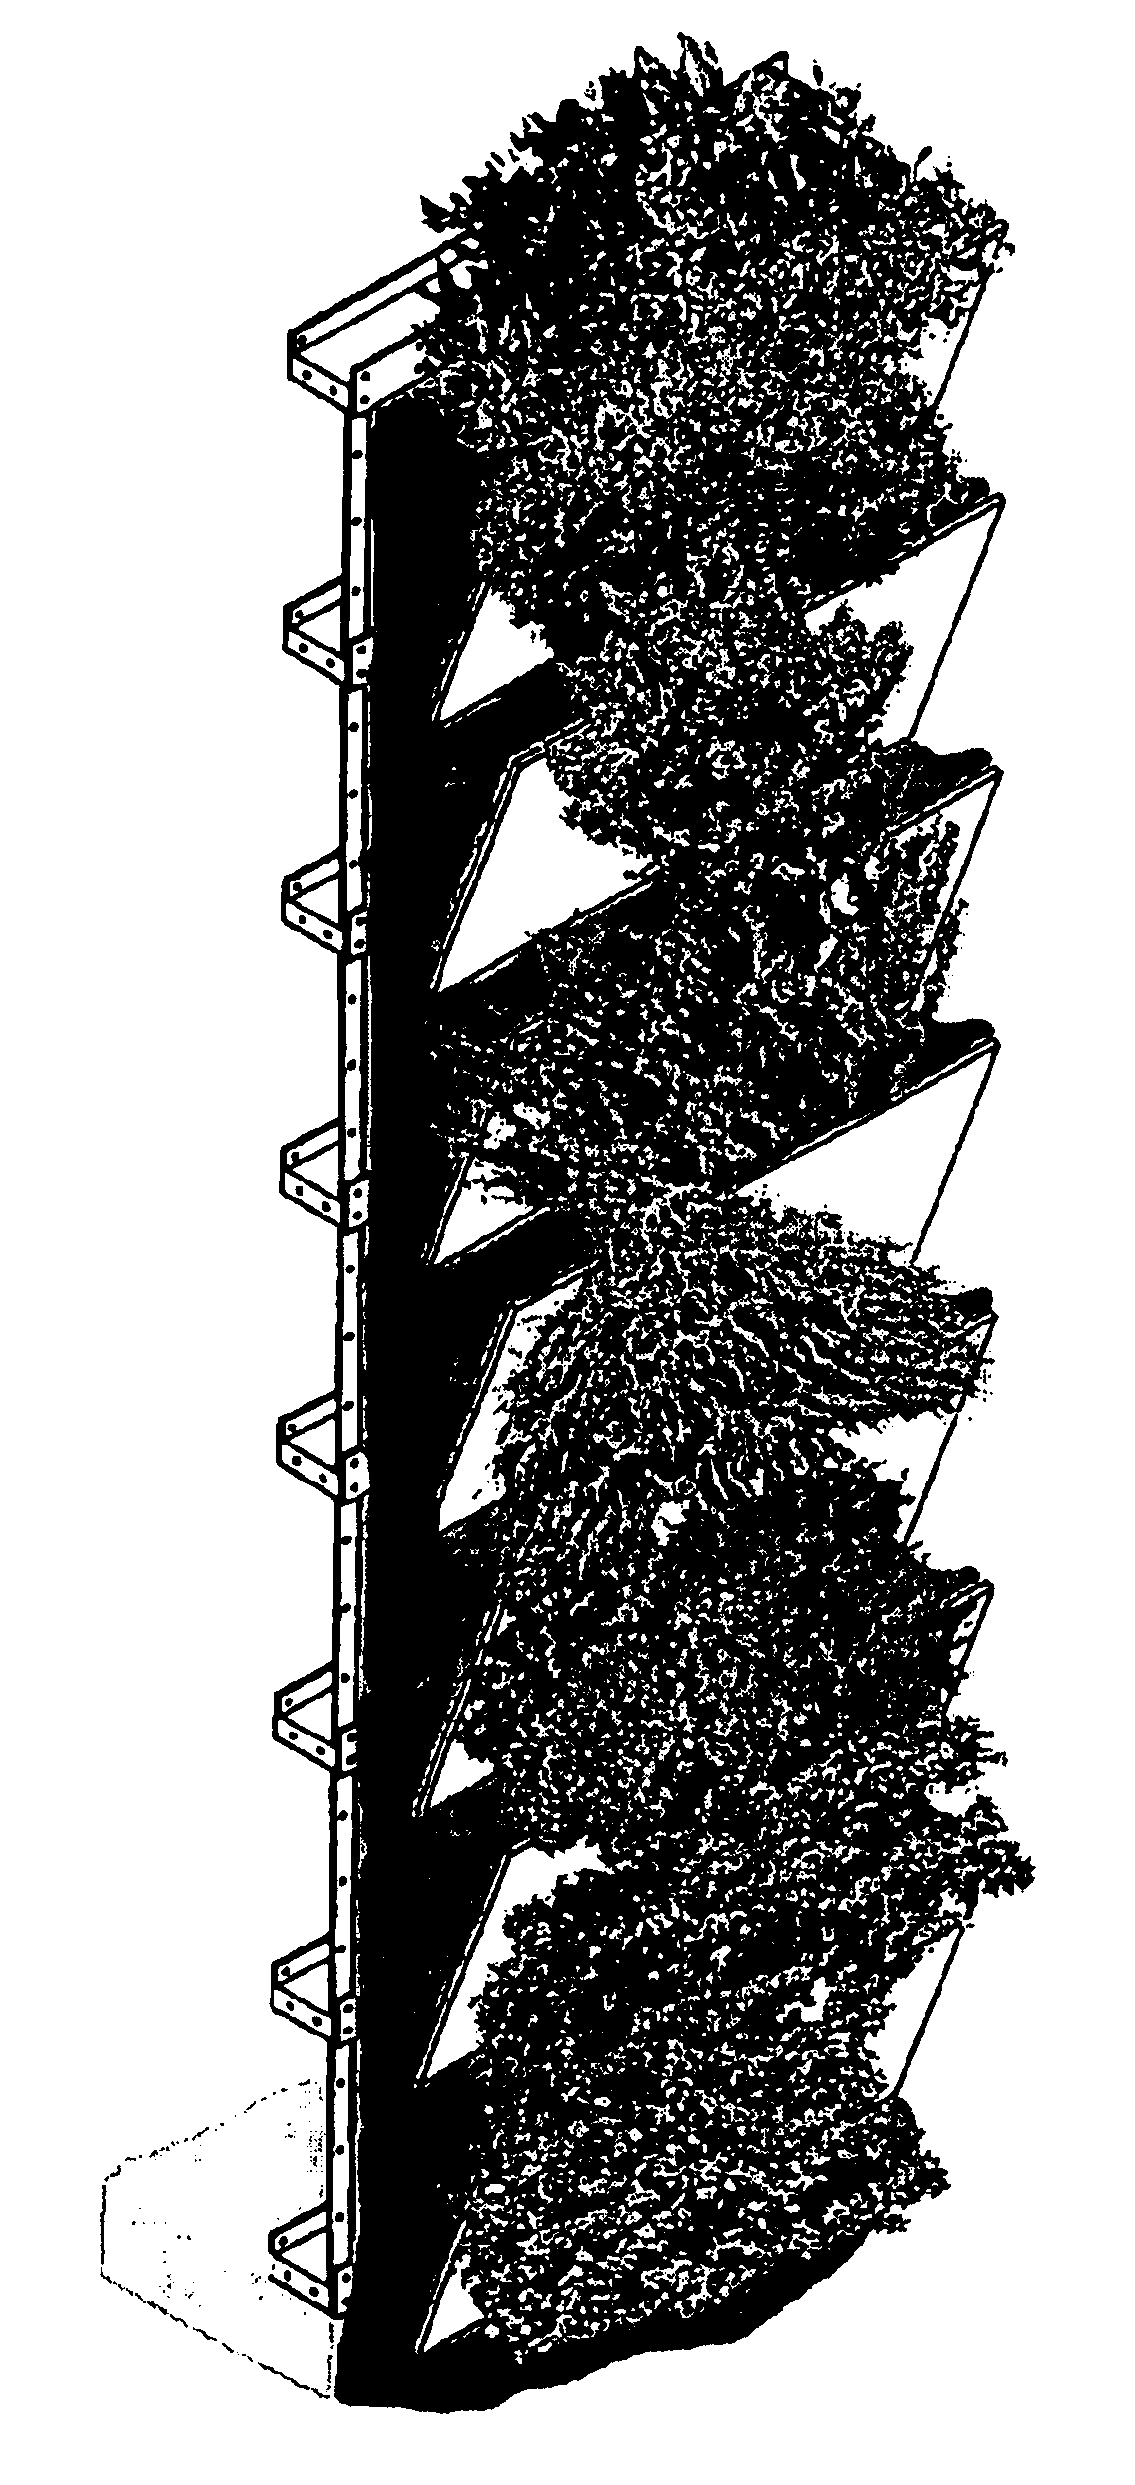 Vertical ecosystem structure